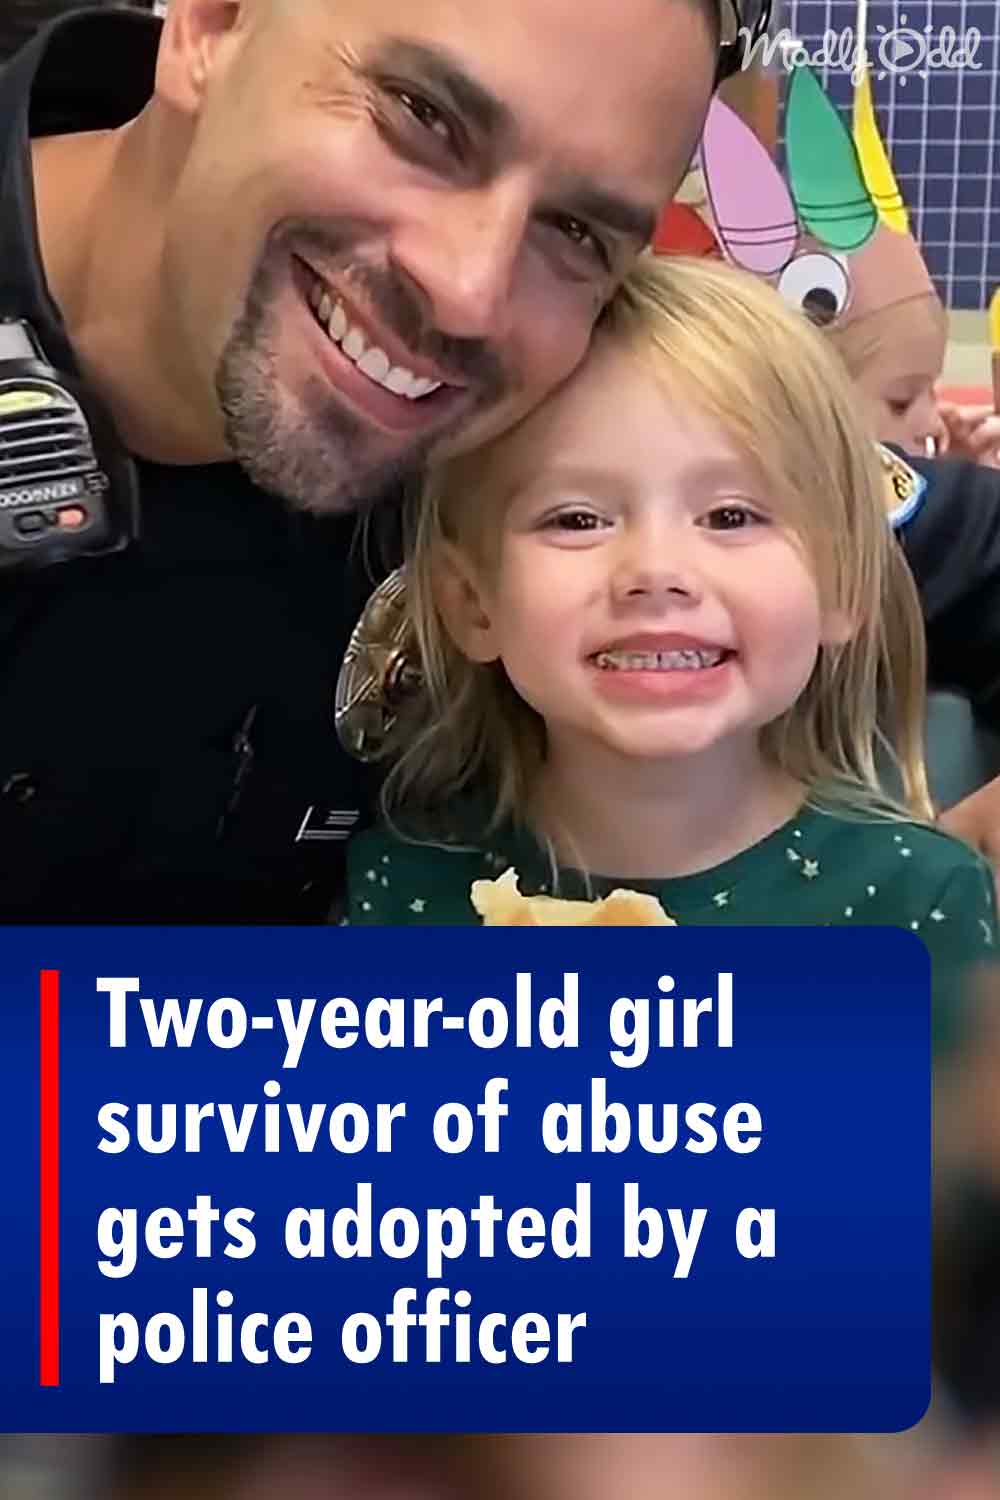 Two-year-old girl survivor of abuse gets adopted by a police officer